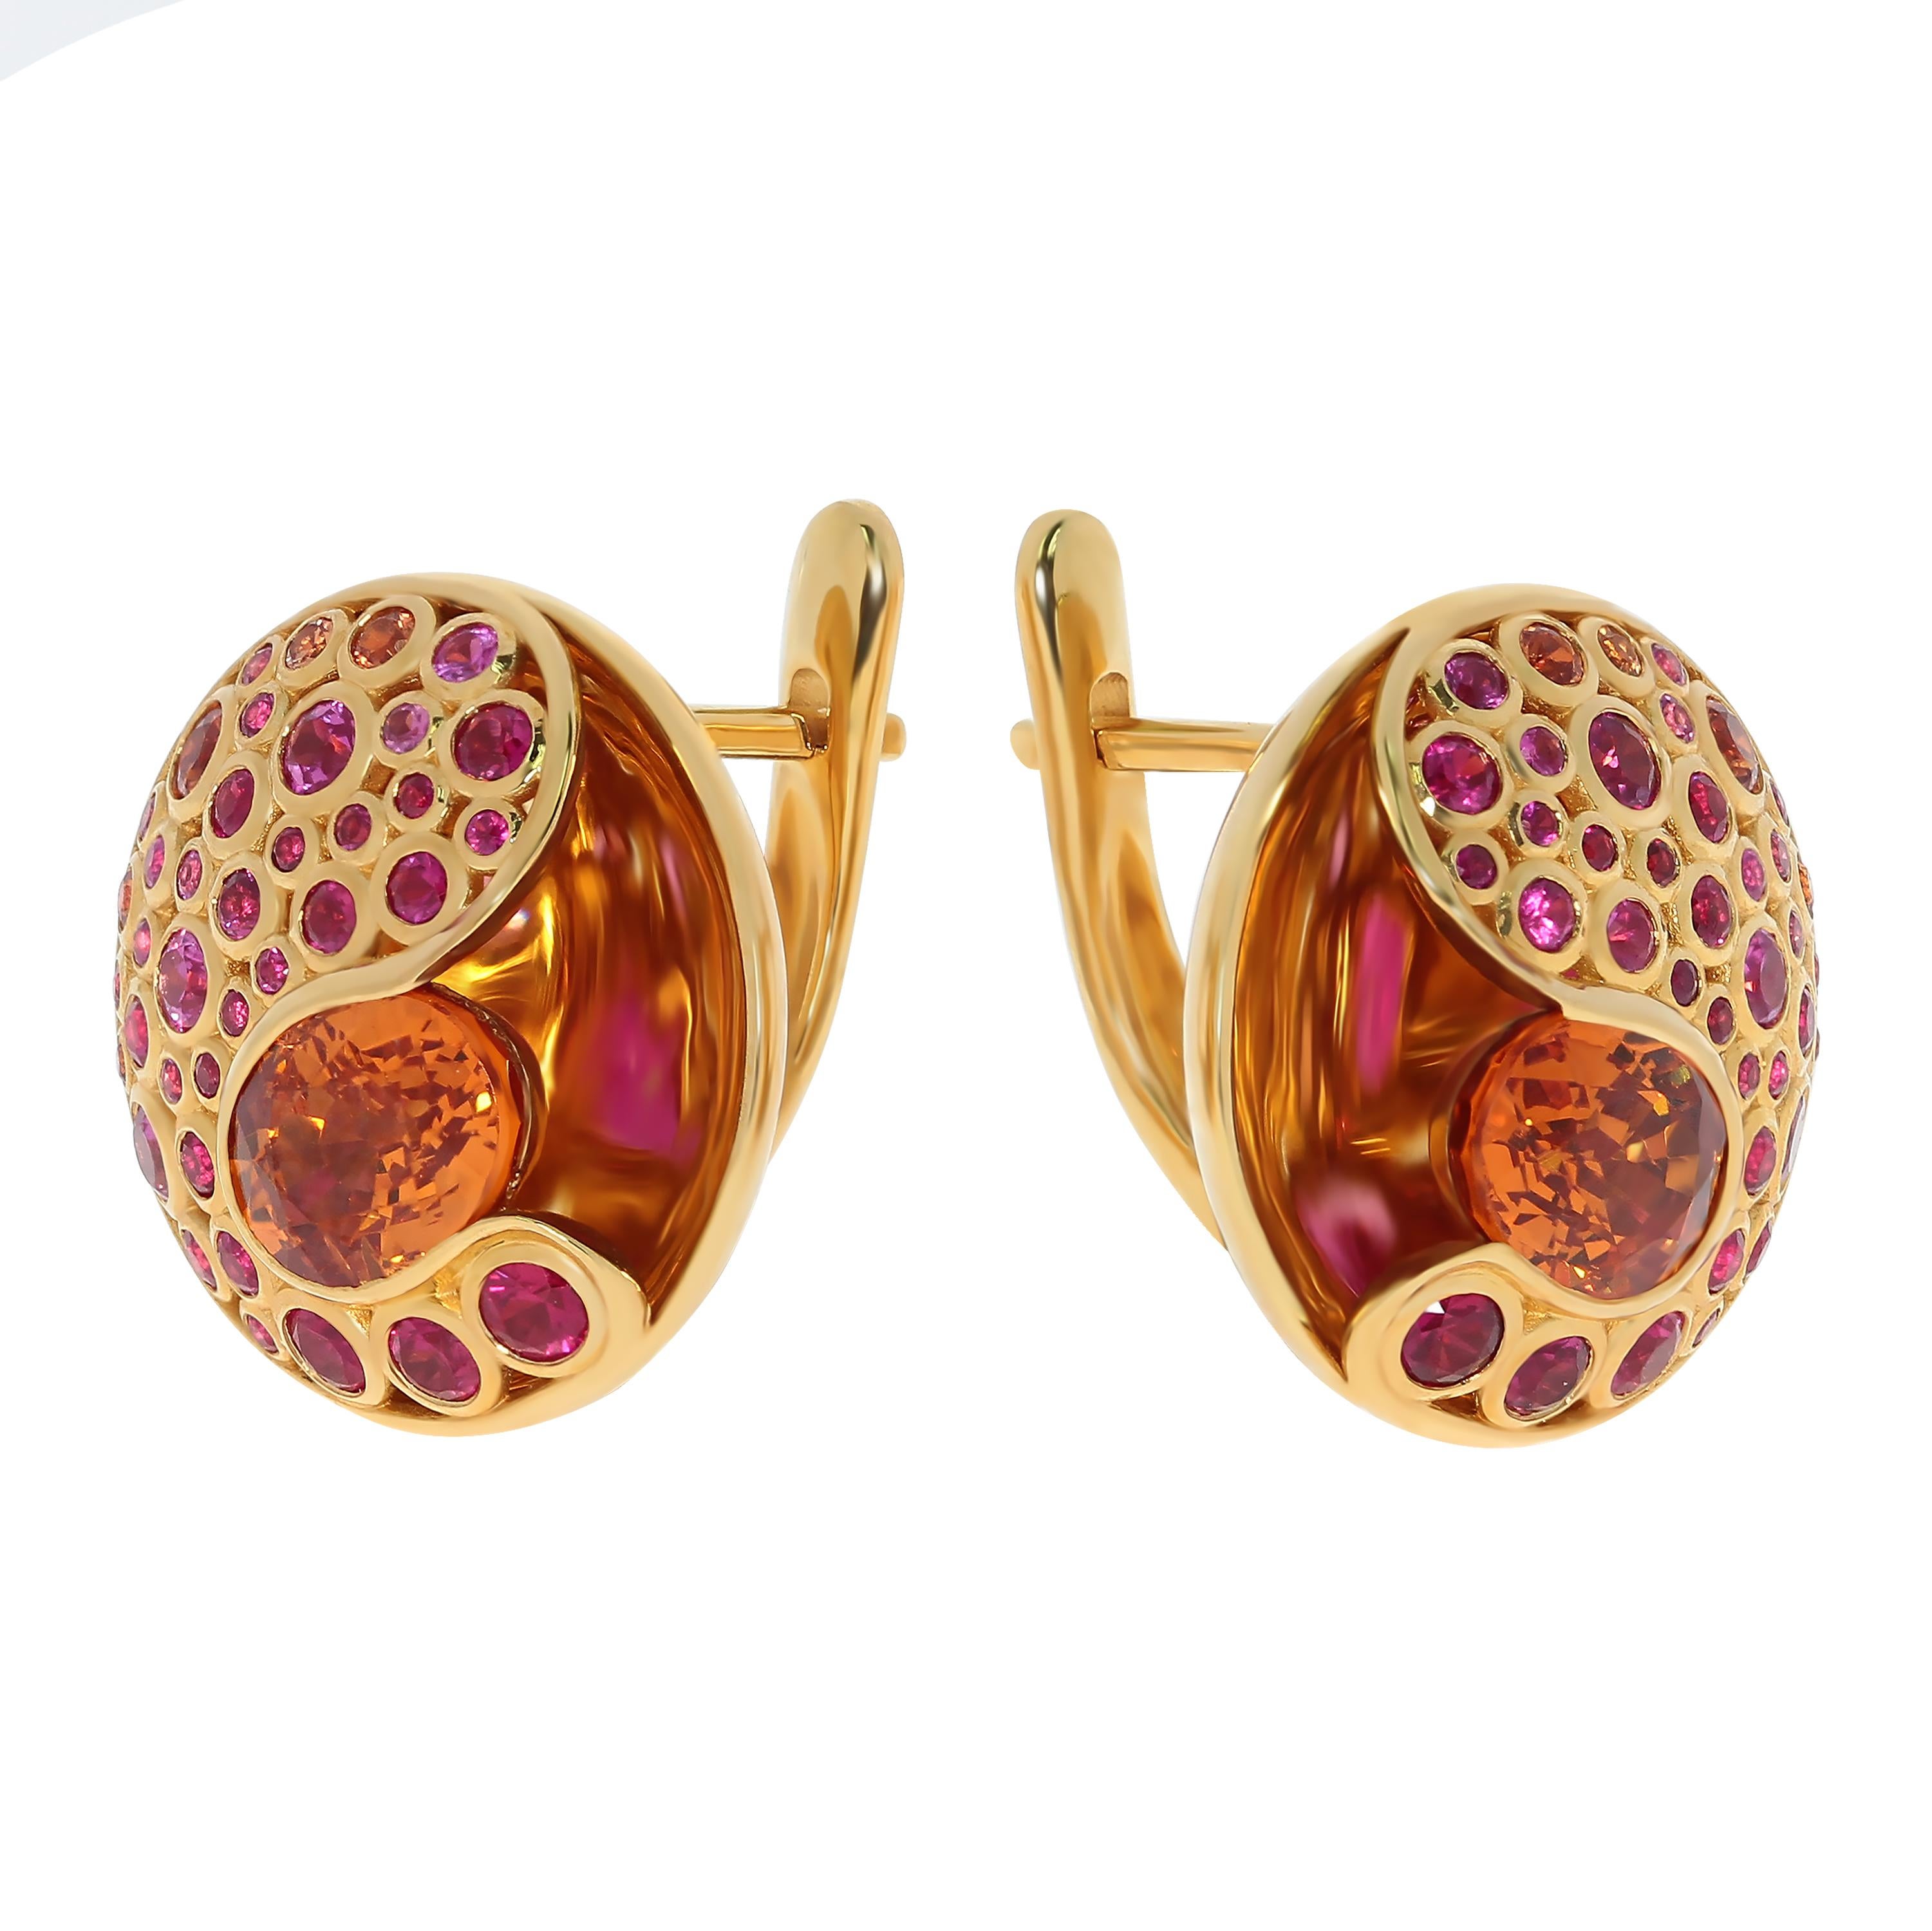 Spessartine 2.59 Carat Ruby Sapphire 18 Karat Yellow Gold Bubble Earrings
Incredibly light and airy Earrings from our Bubbles Collection. Yellow 18 Karat Gold is made in the form of variety of small bubbles, some of which have 43 Rubies and 33 Pink